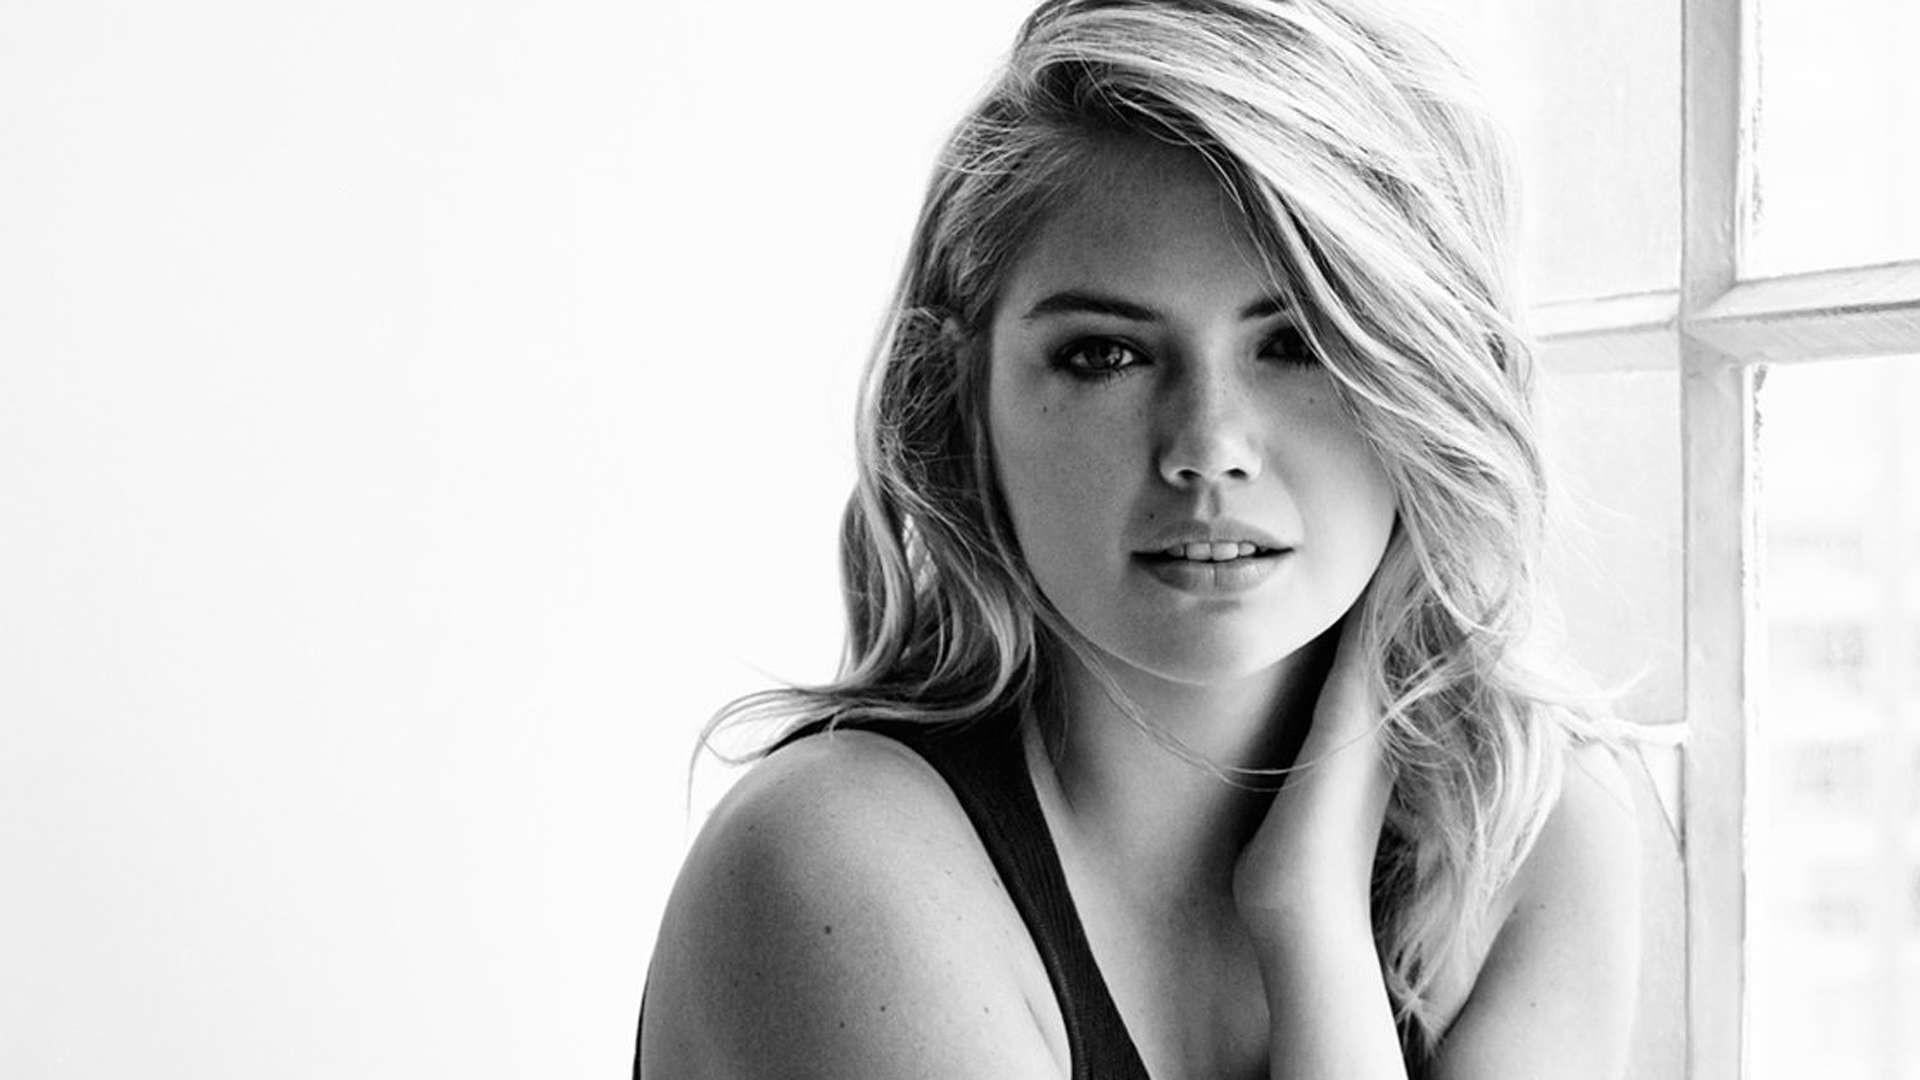 1920x1080 Kate Upton New Wallpapers | AMBWallpapers